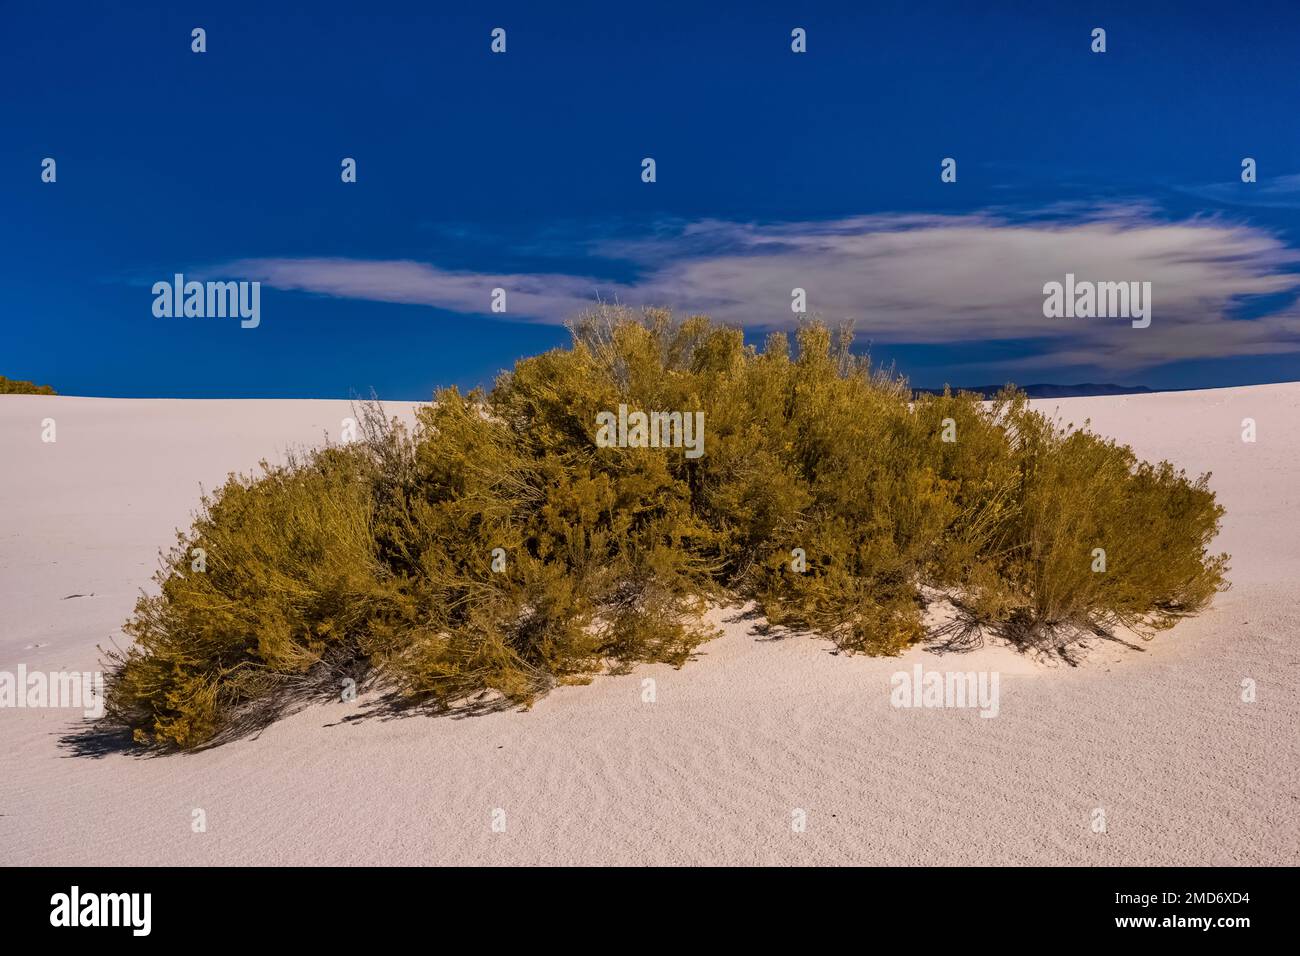 White Sands National Park, New Mexico, USA Banque D'Images